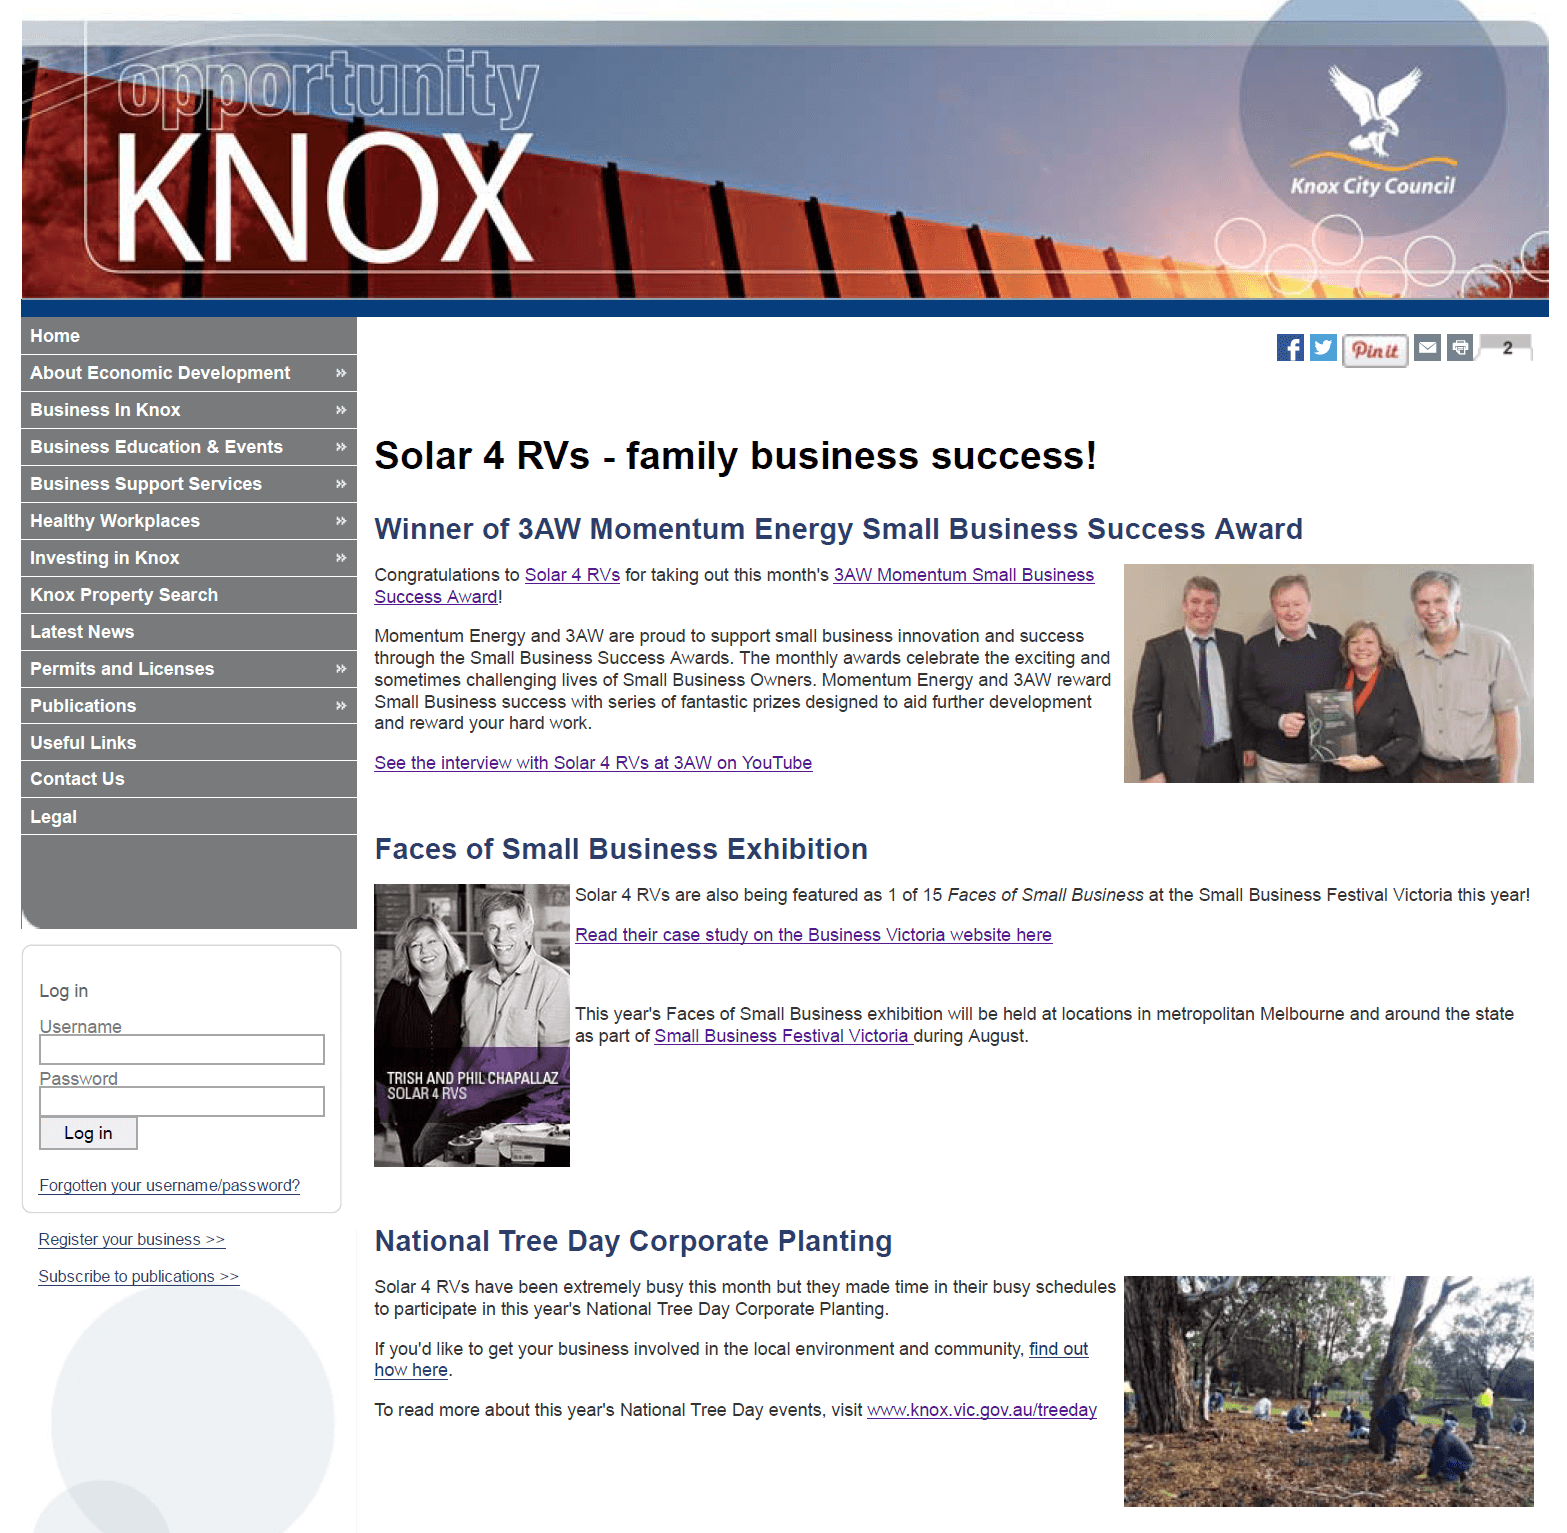 Knox Business Direct web page features Solar 4 RVs success